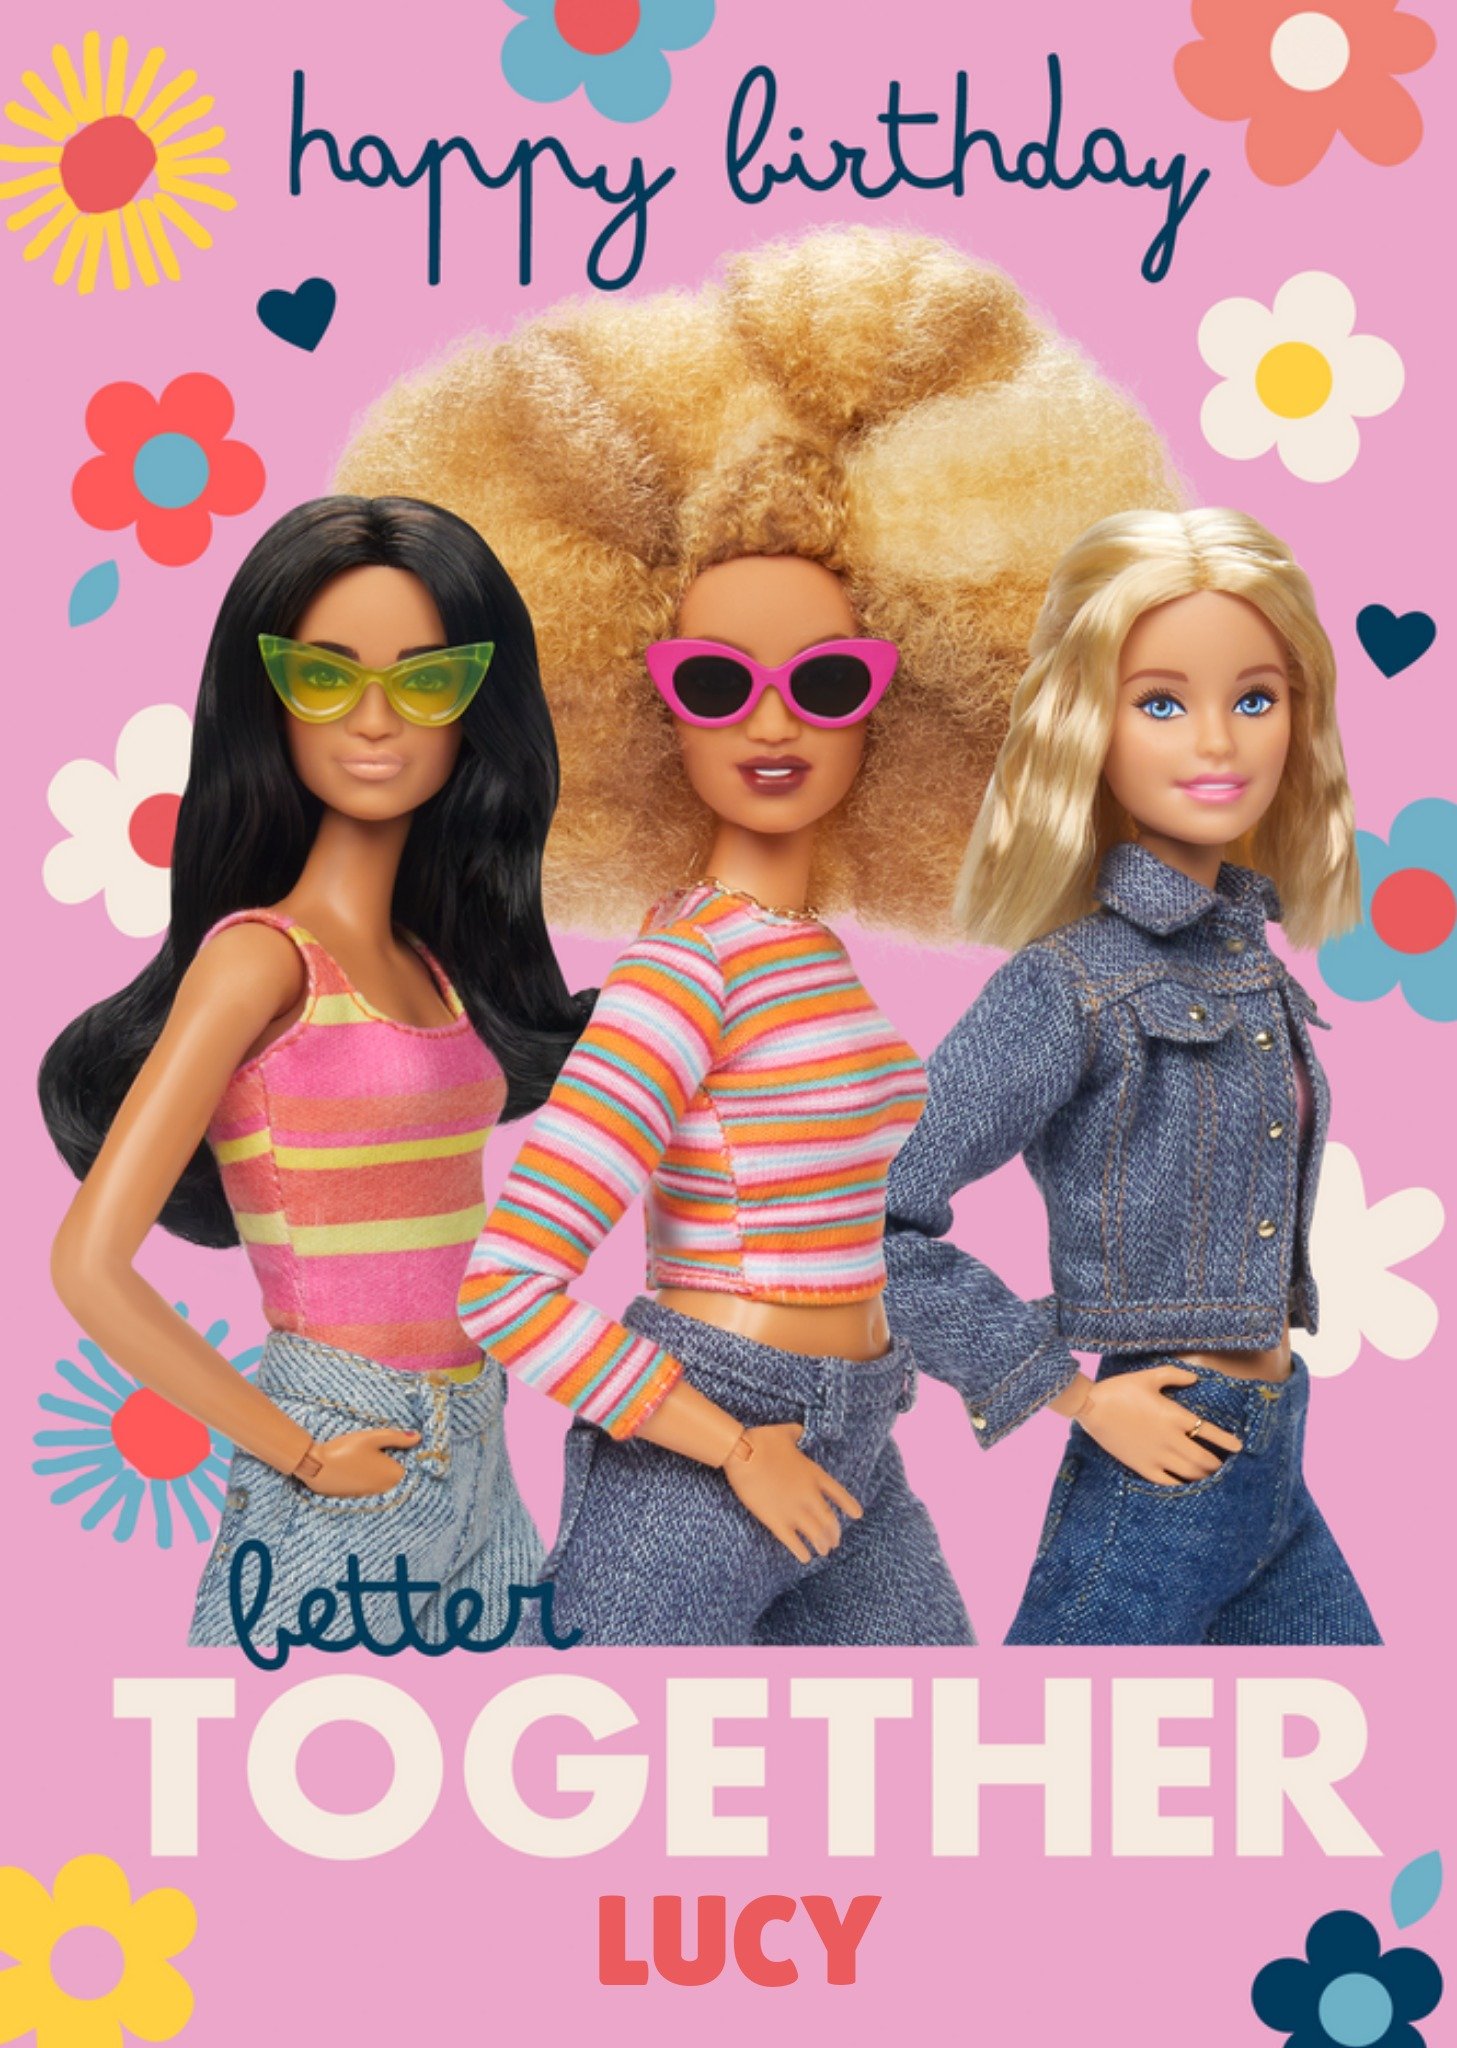 Barbie Doll And Friends Better Together Fun Bright Birthday Card Ecard